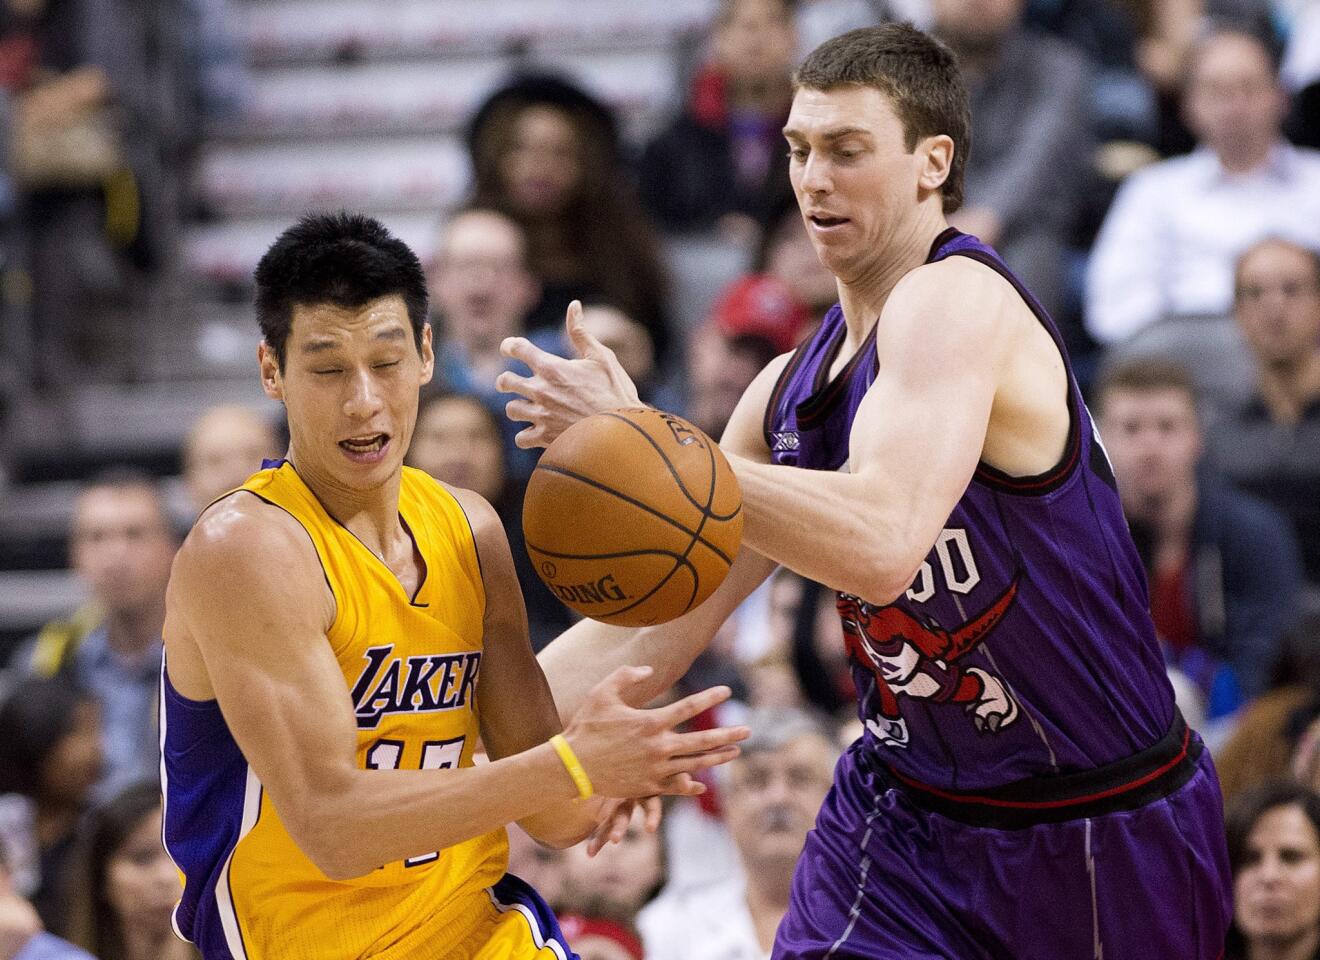 Lakers guard Jeremy Lin and Raptors forward Tyler Hansbrough try to get a grasp on a loose ball in the second half.